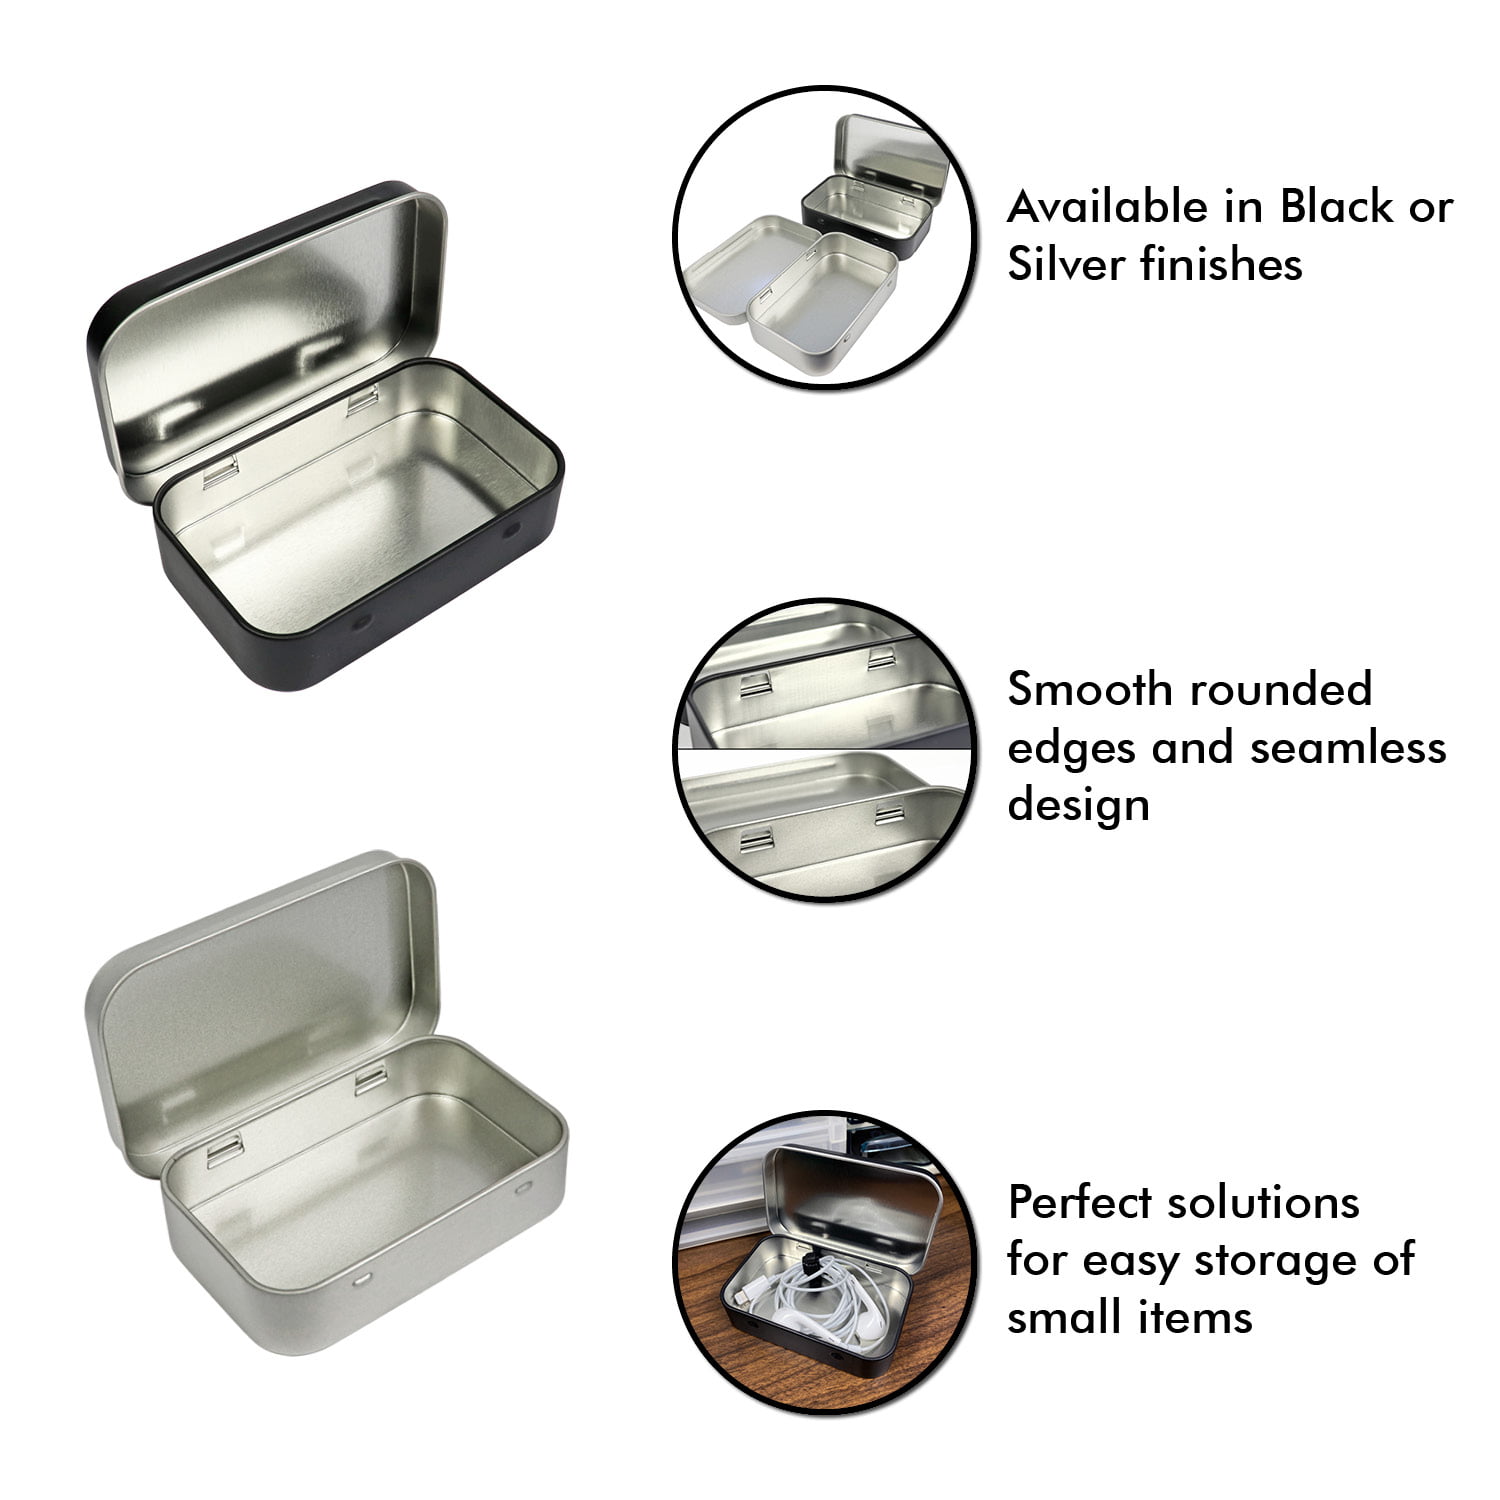 VNDEFUL 2 Pieces Metal Hinged Top Tin Box Containers Mini Portable Box Small Storage Kit Home Organizer 